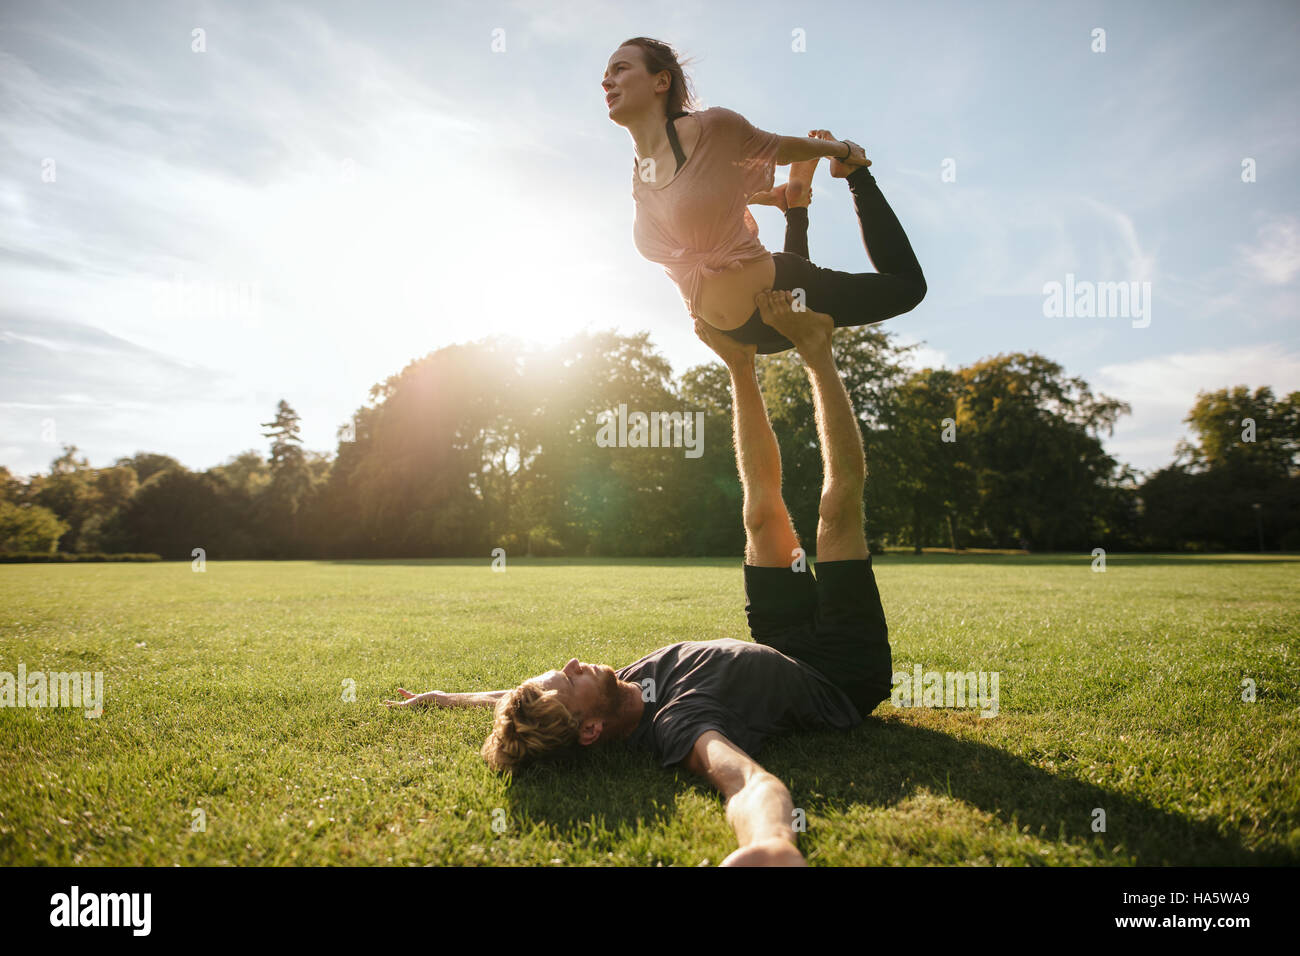 Healthy young couple doing acro yoga on grass. Man and woman doing various yoga poses in pair outdoors at the park. Stock Photo